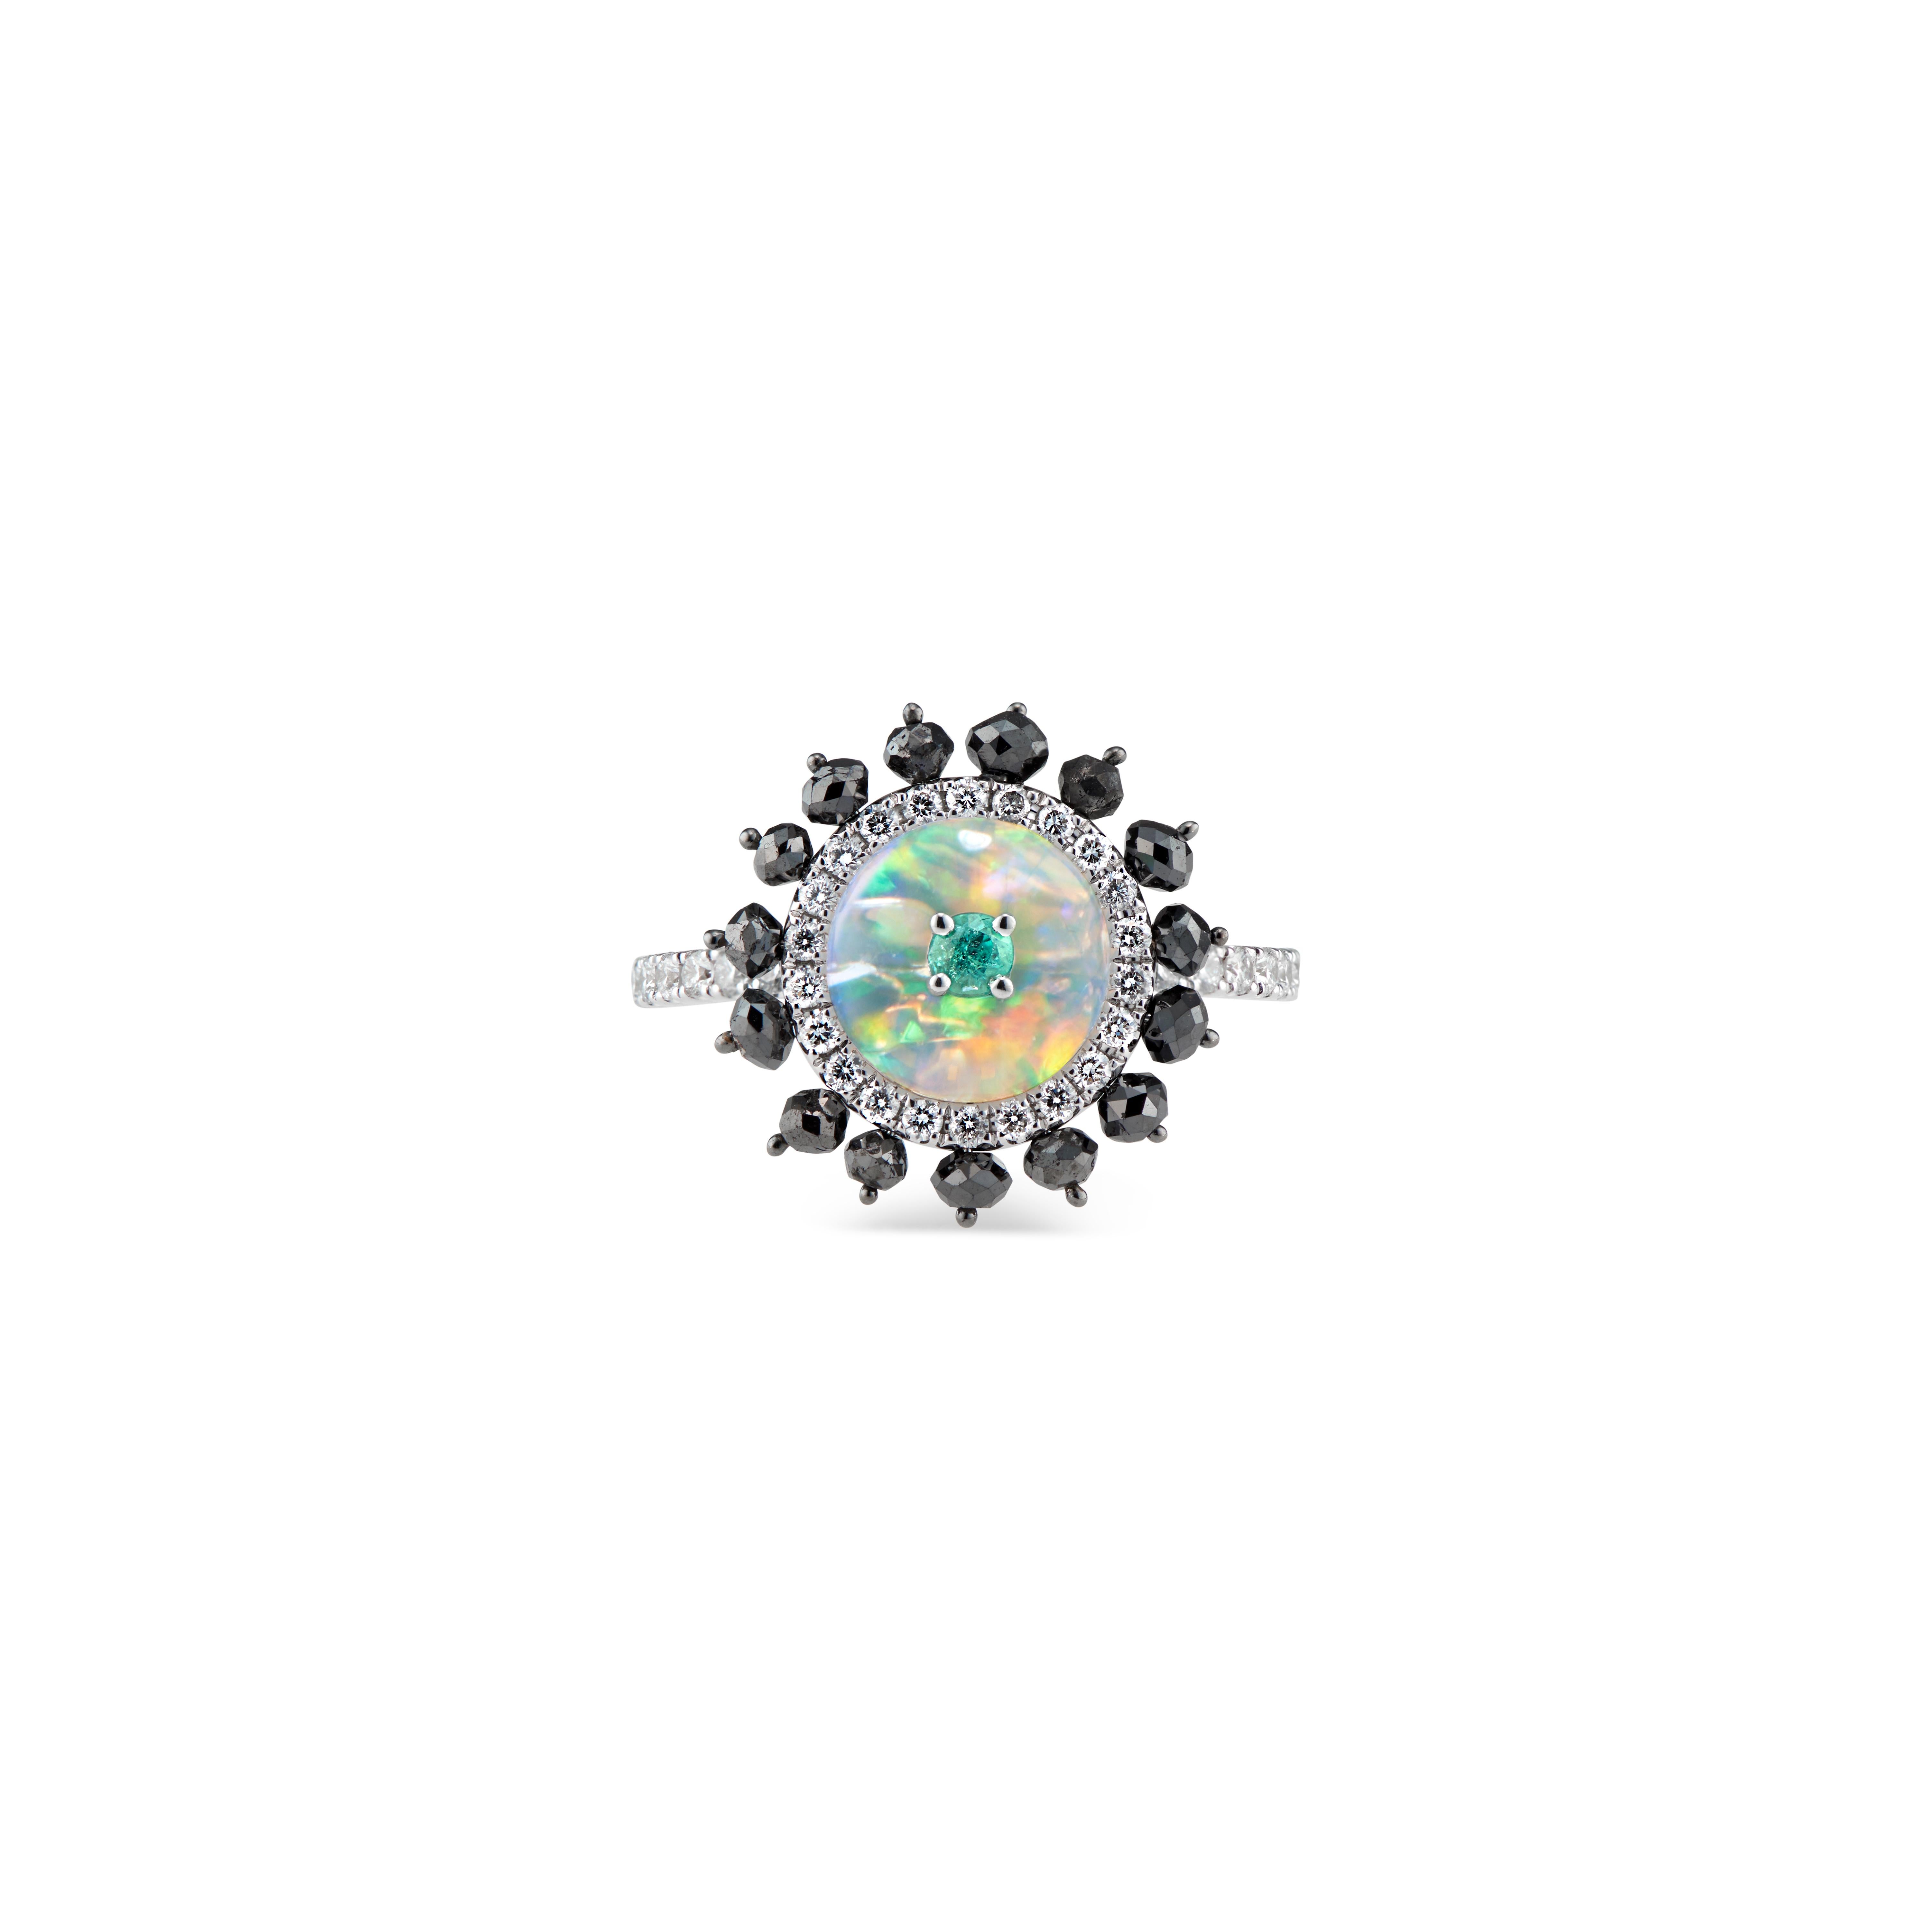 Spectacular Opals overlaid with Brazilian Paraibas and white diamonds and black diamond beads, set in 18k white gold. Brilliant Cut Diamonds are 0.58 ctw